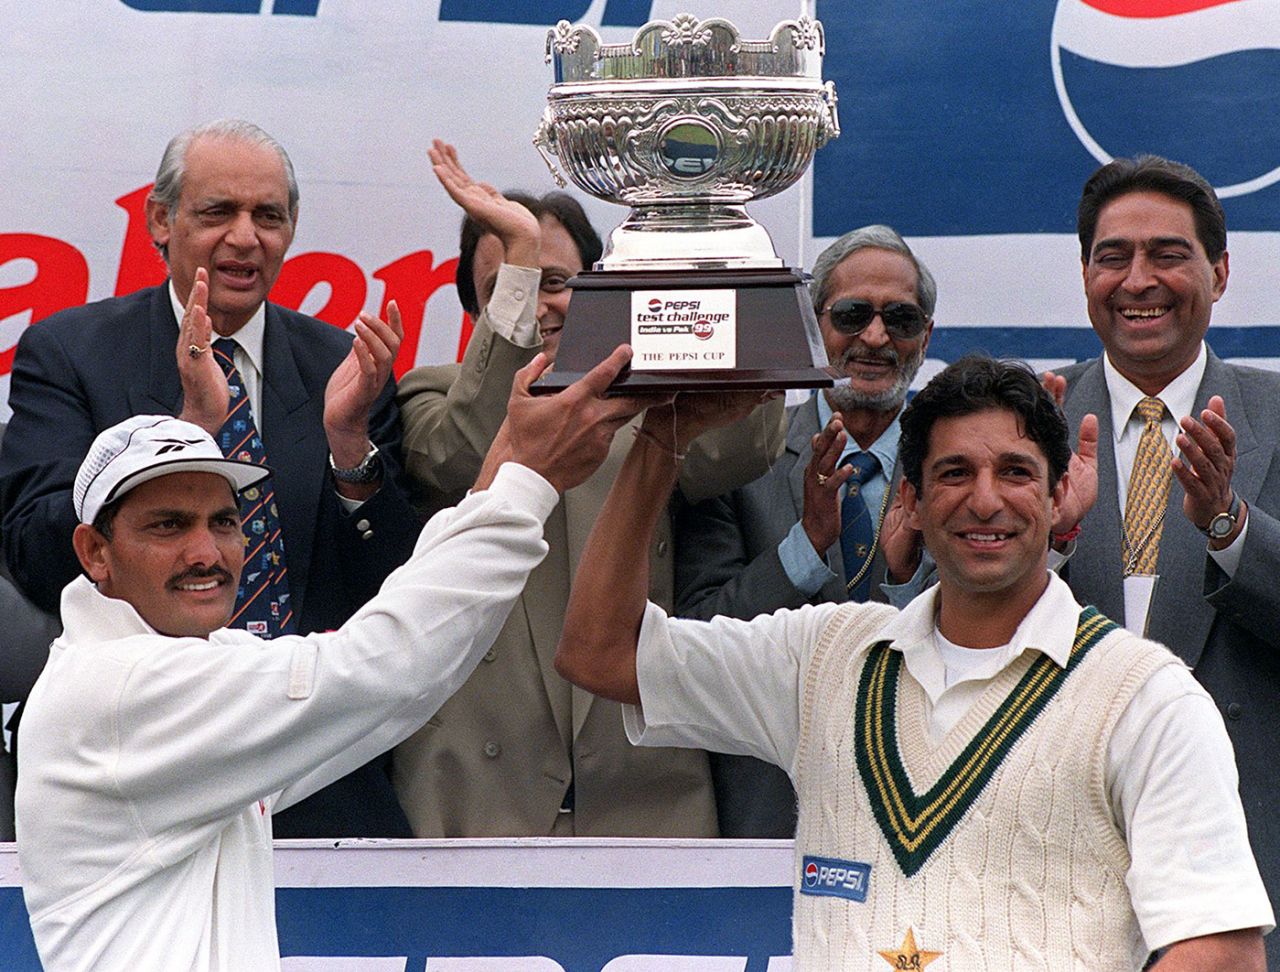 Mohammad Azharuddin and Wasim Akram lift the trophy after the Test series was drawn 1-1, India v Pakistan, Delhi, 4th day, February 7, 1999